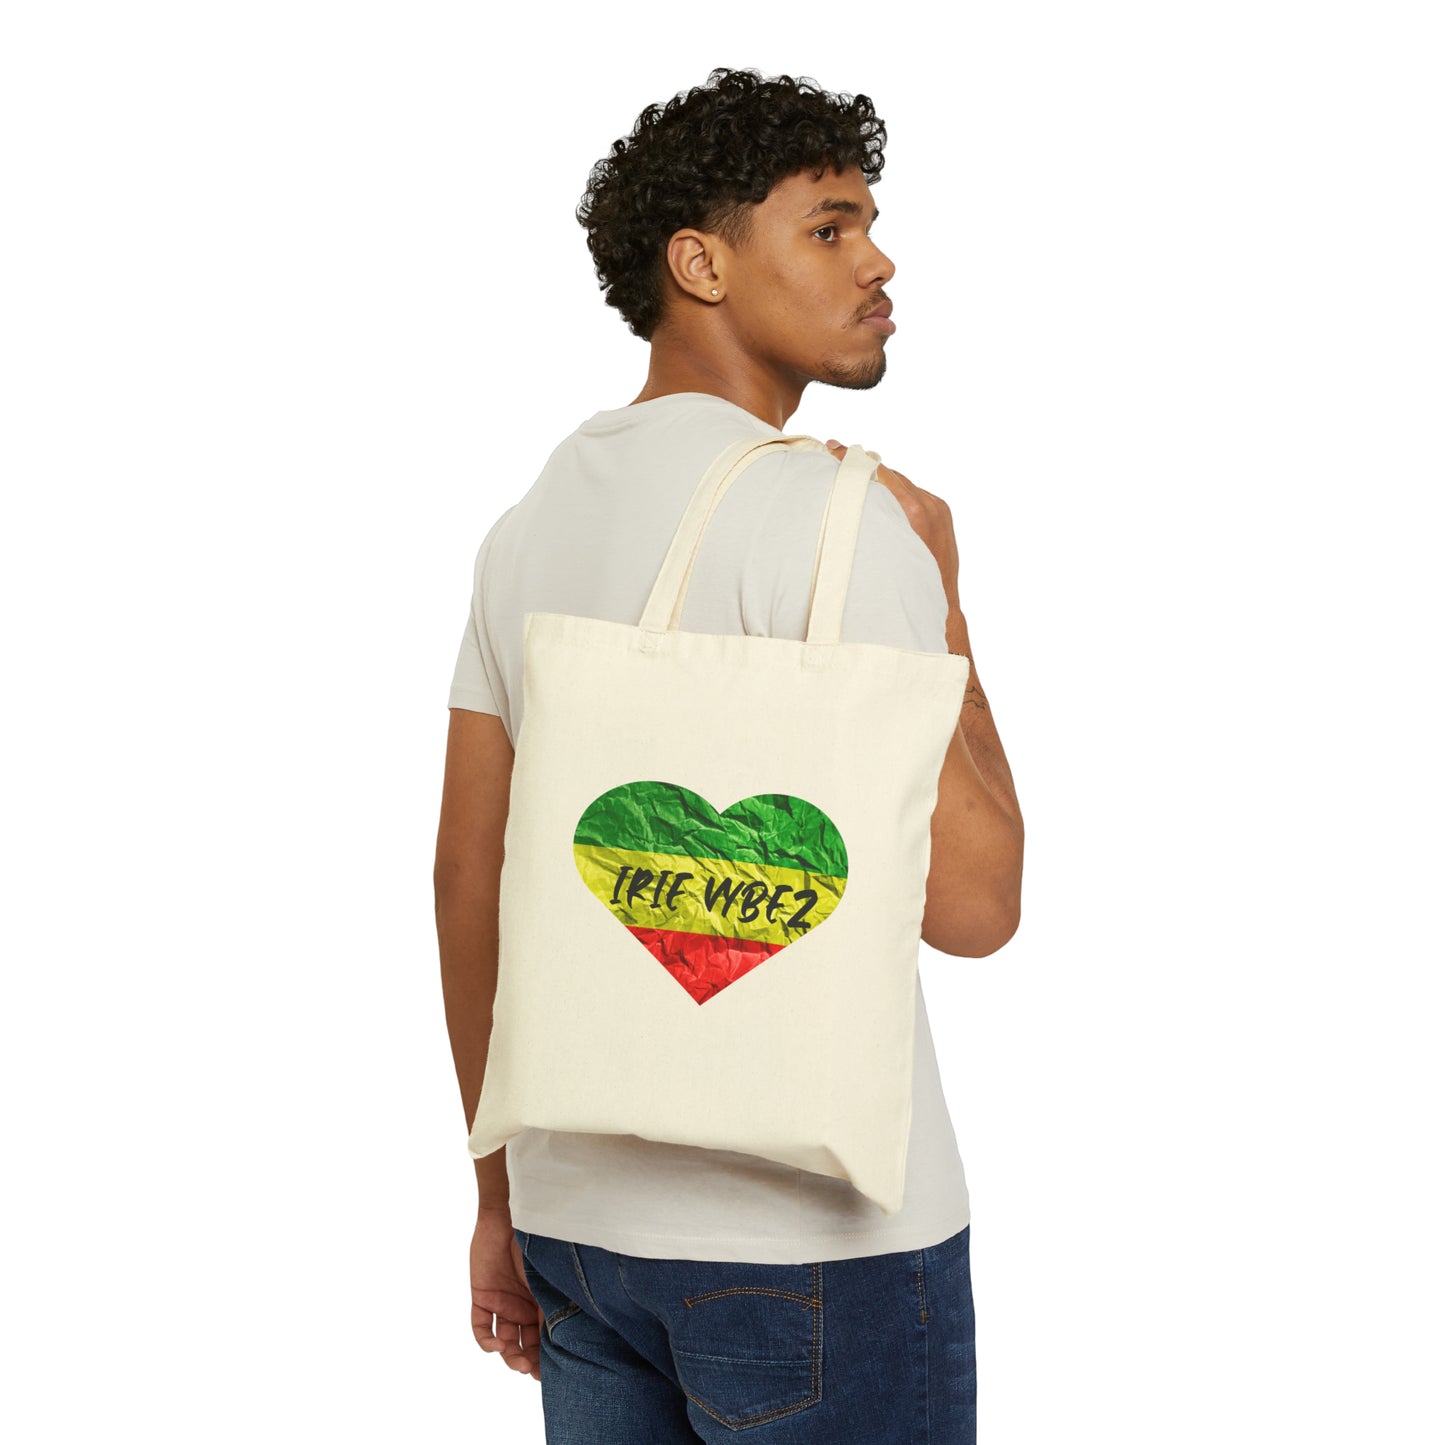 IRIE VYBEZ ROOTS COLOR HEART DESIGN TOTE BAG GIFT